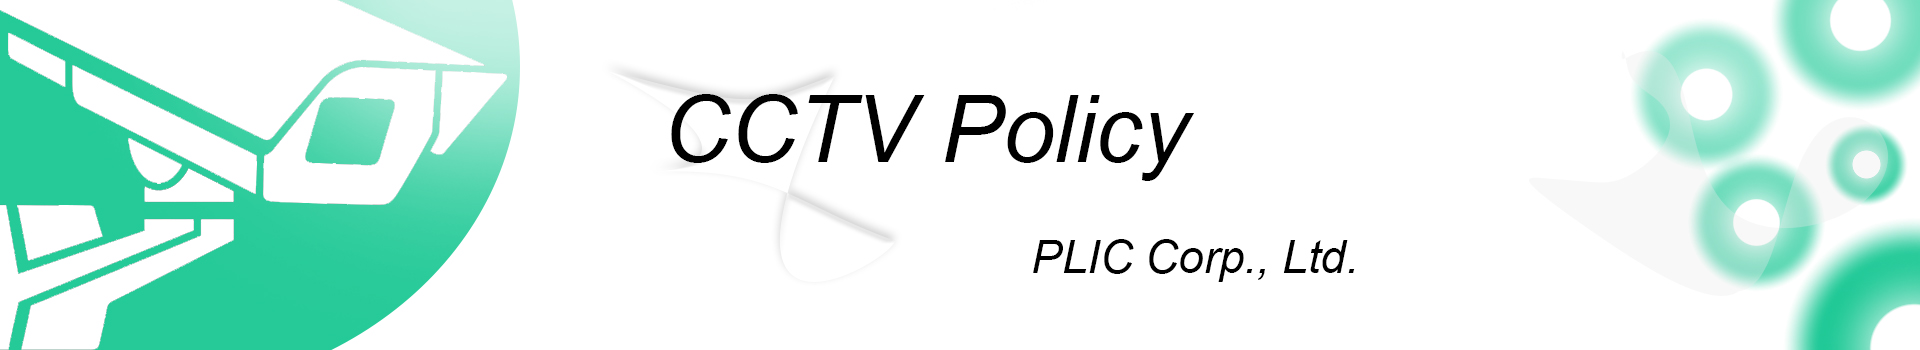 cctv policy